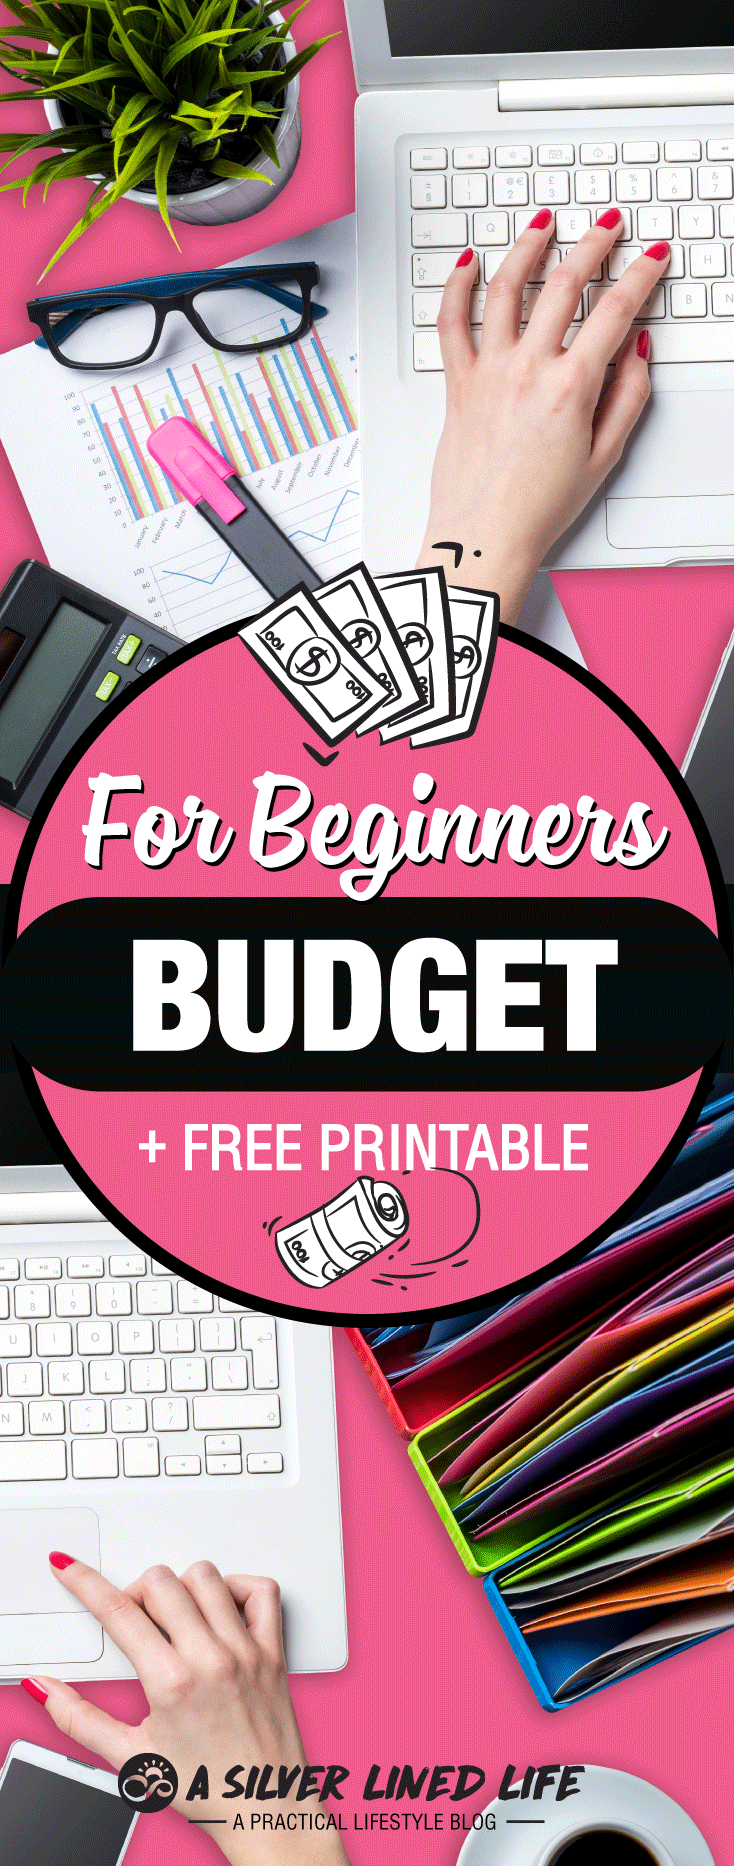 FREE amazing budget printable & worksheet! This is an awesome guide to budgeting for beginners. The best basic tips for money management are all answered in this post!